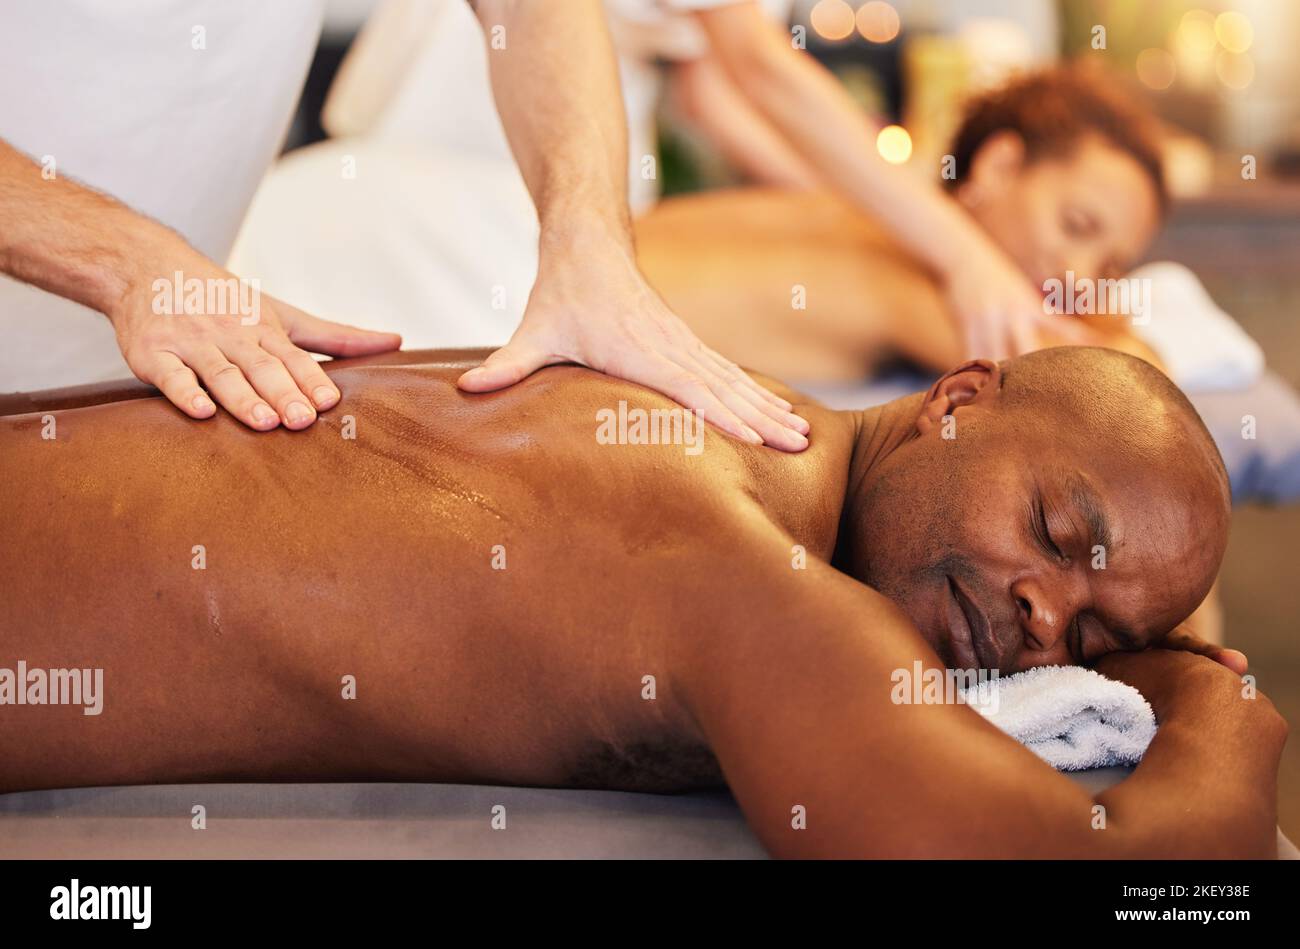 Premium Photo  Young man with dark skin having healing full body massage  from male therapist at luxury spa wellness center handsome muscular naked  man getting relaxing back massage lying on couch